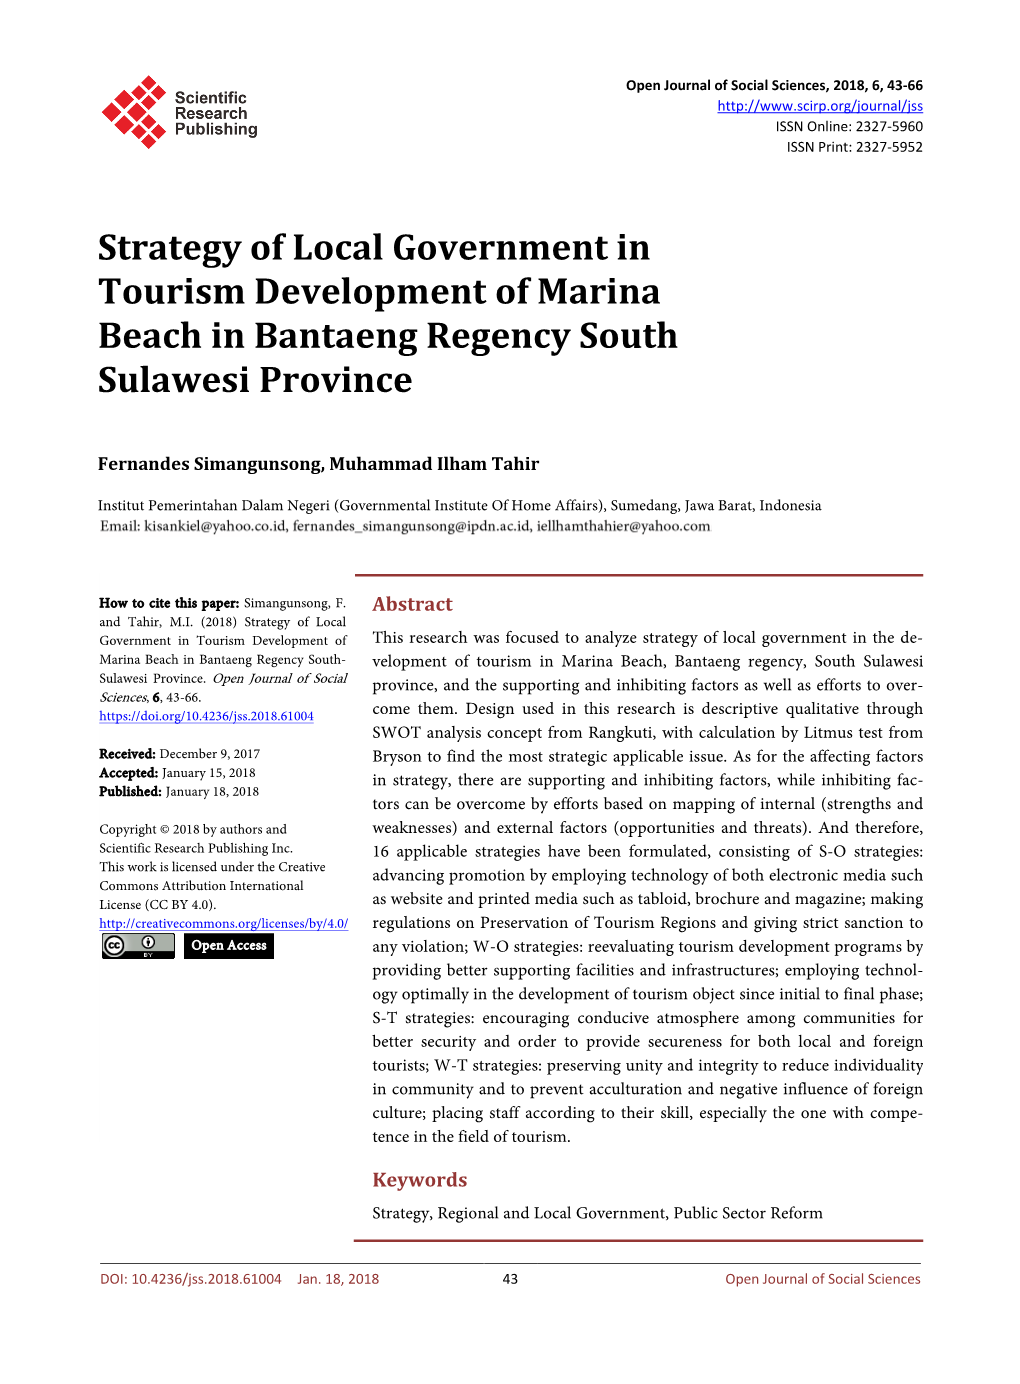 Strategy of Local Government Intourism Development Of